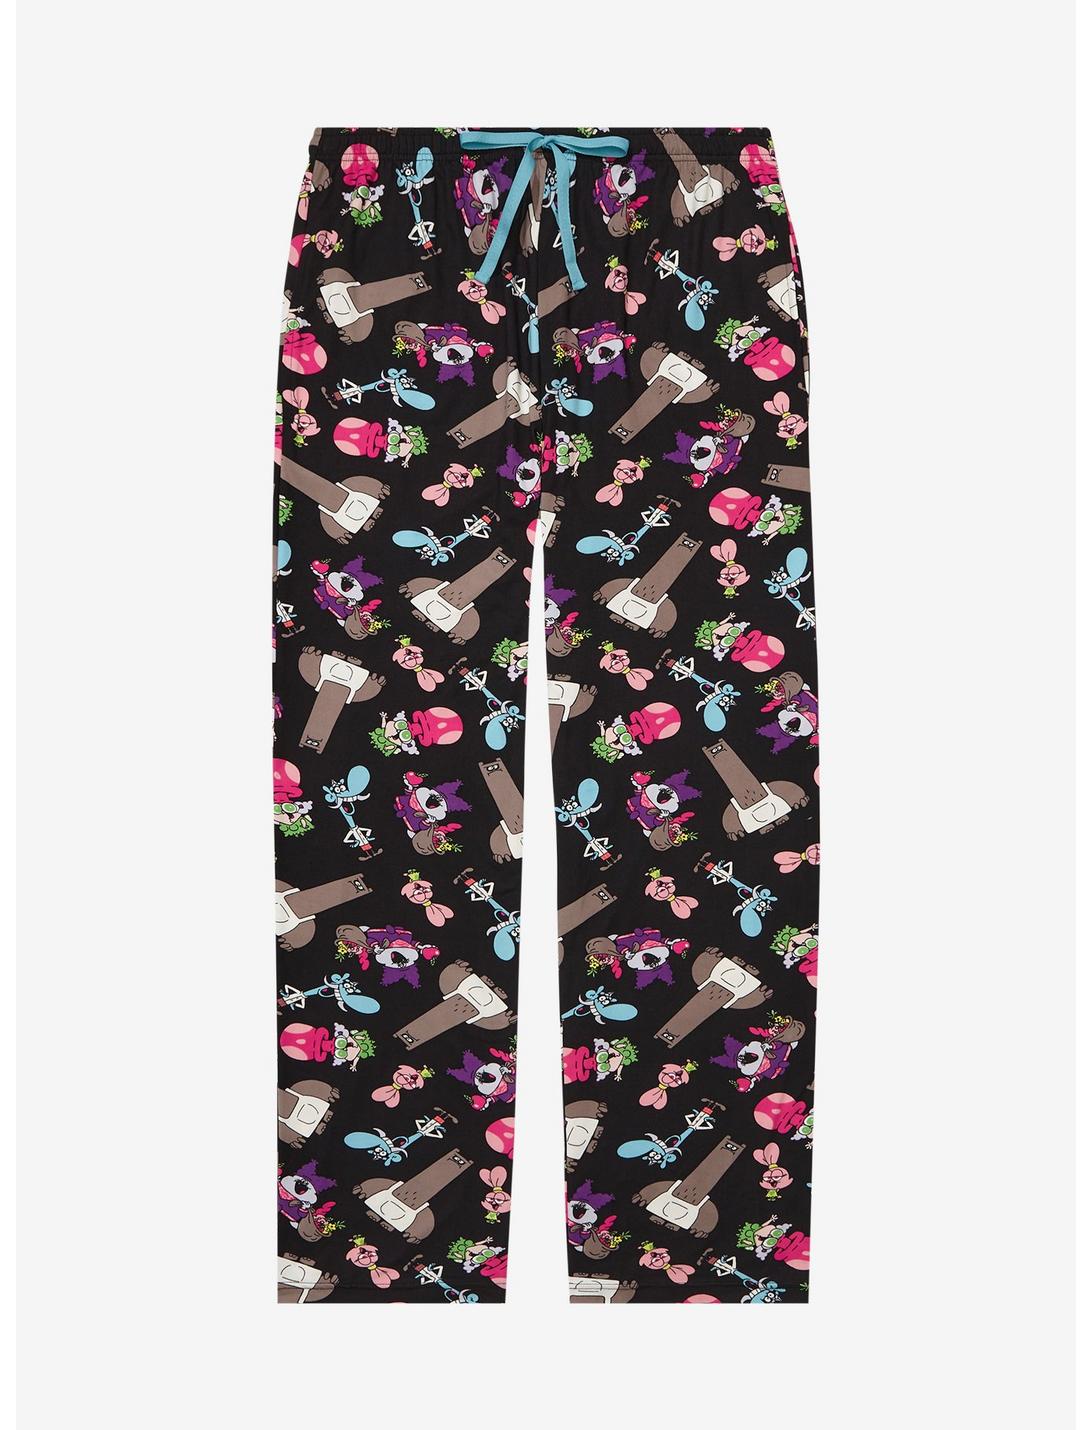 Chowder Characters Allover Print Sleep Pants - BoxLunch Exclusive, BLACK, hi-res